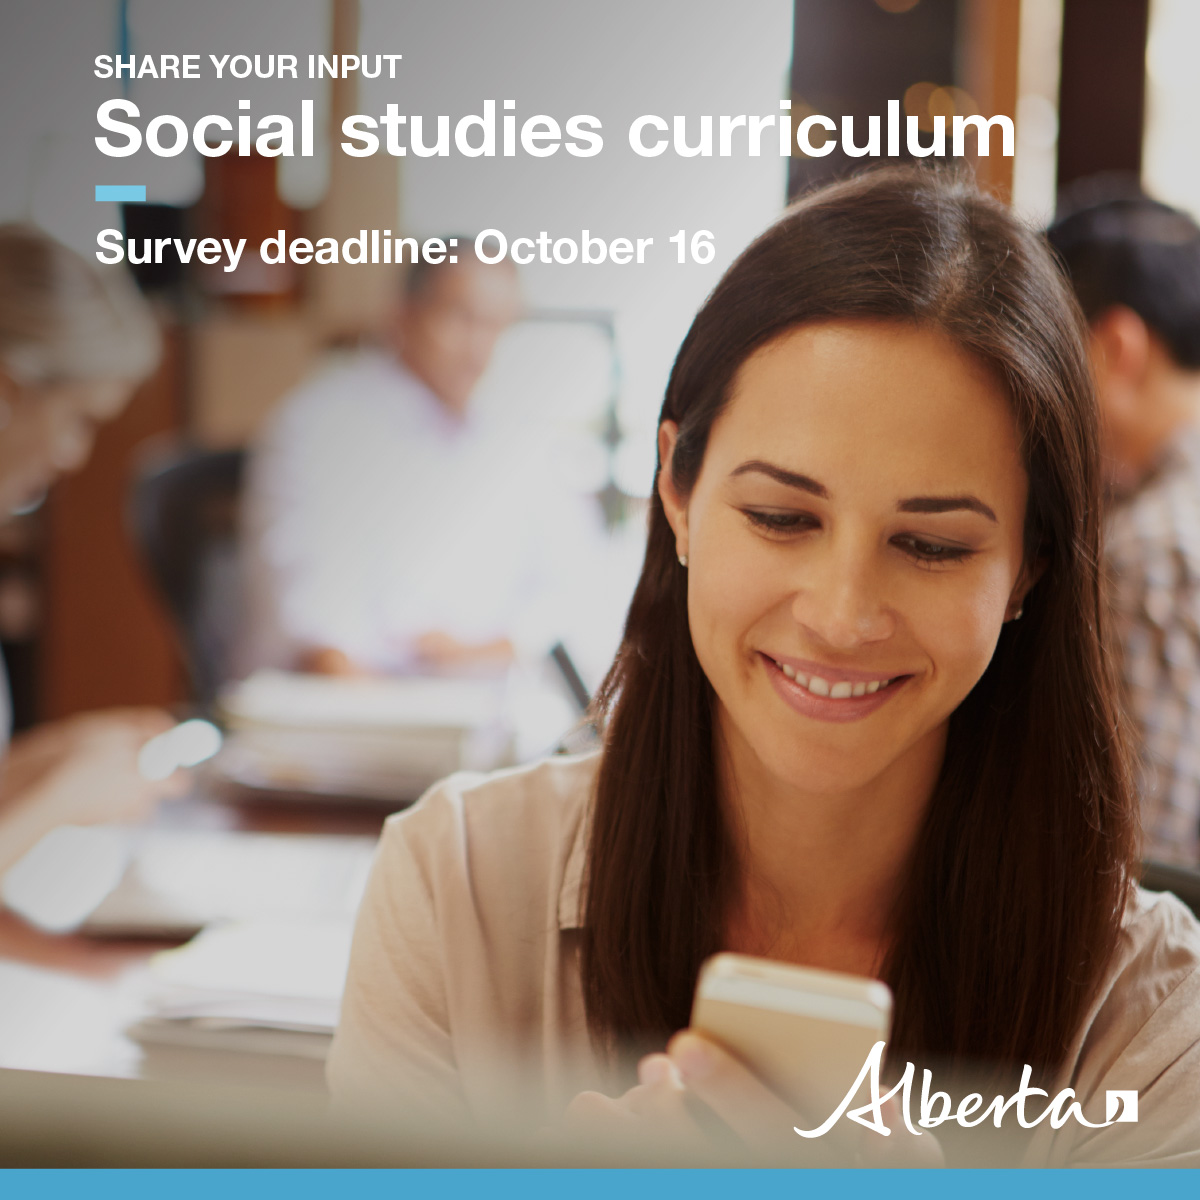 From now until Oct. 16, Albertans can share their thoughts on what they’d like students to learn in #AbEd's social studies curriculum through a survey at alberta.ca/curriculum-hav…. Survey results will be used to inform draft curriculum before it’s released for further engagement.